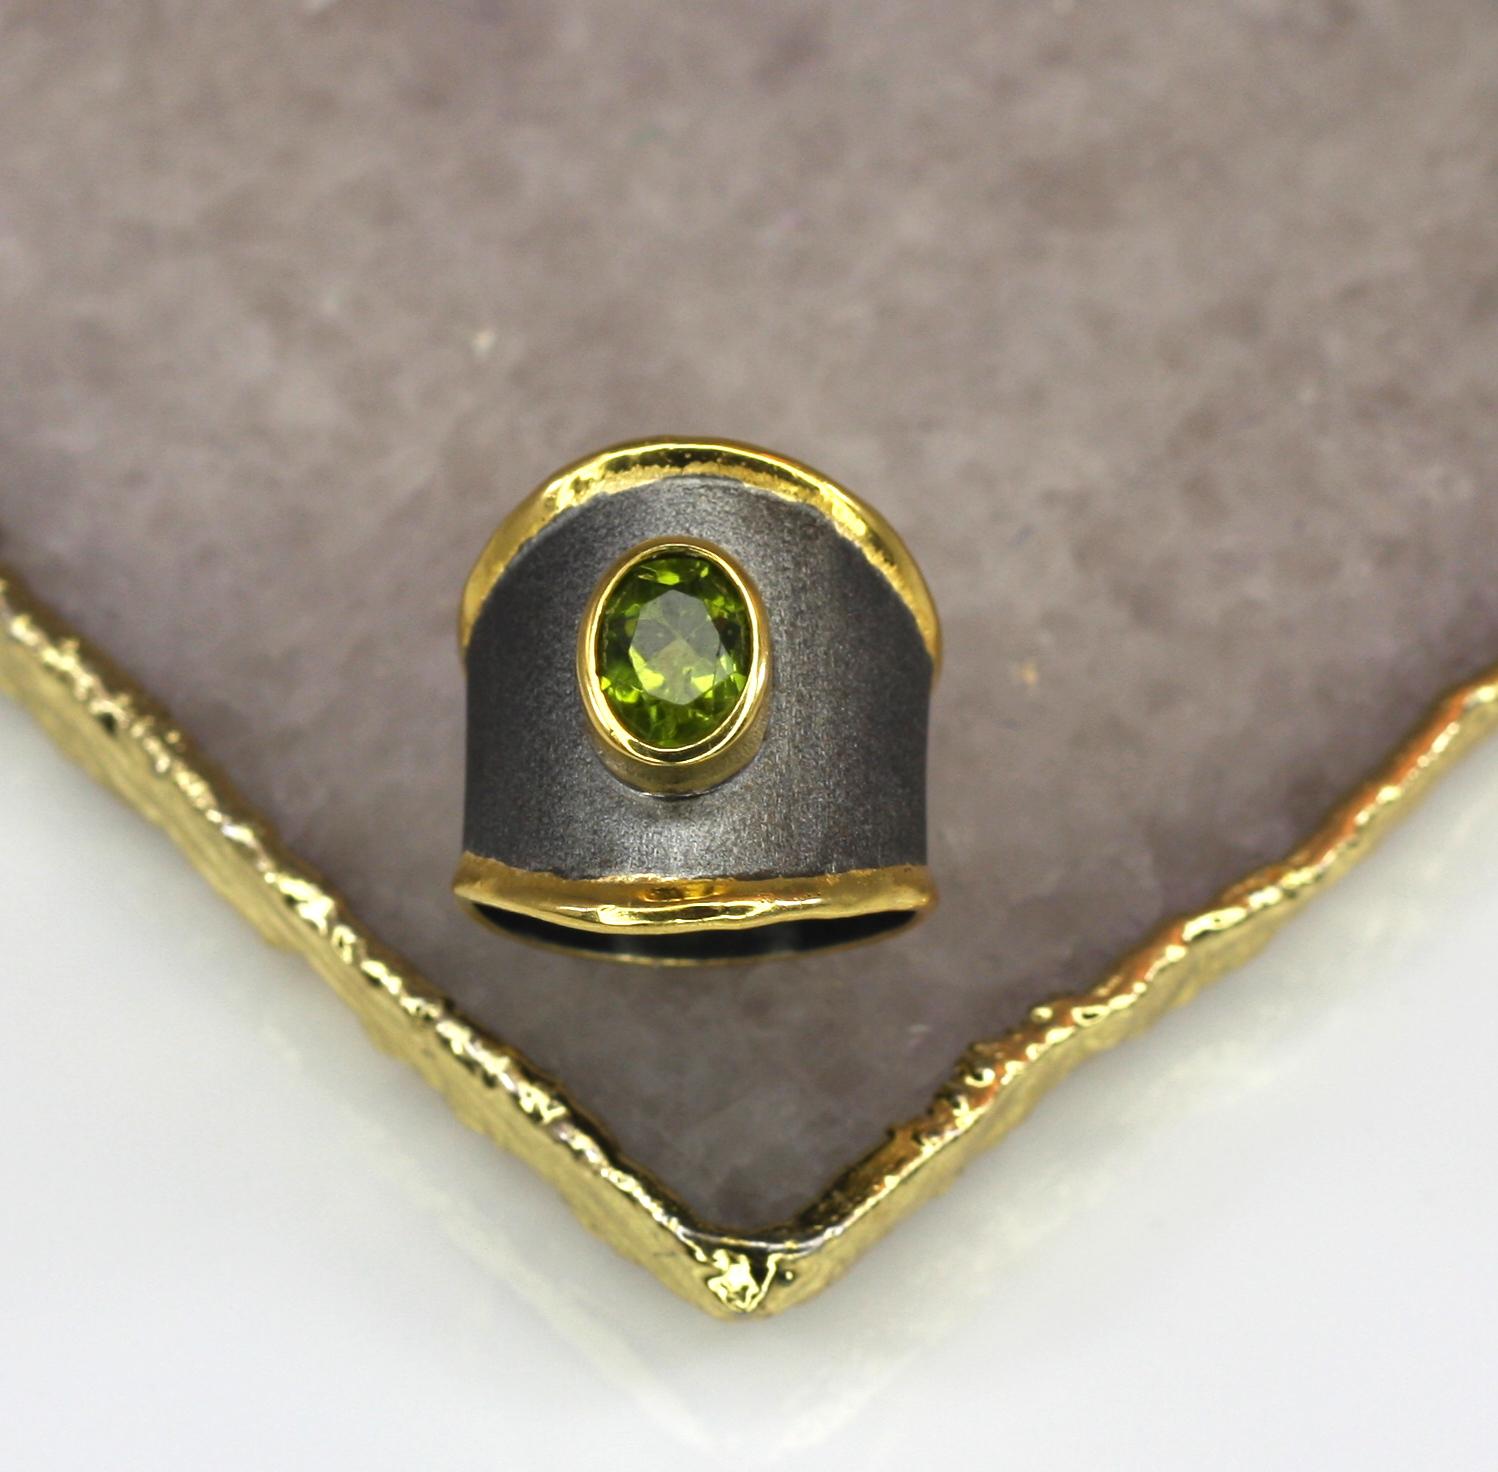 Contemporary Yianni Creations Peridot Fine Silver Ring Finished with Rhodium and Pure Gold